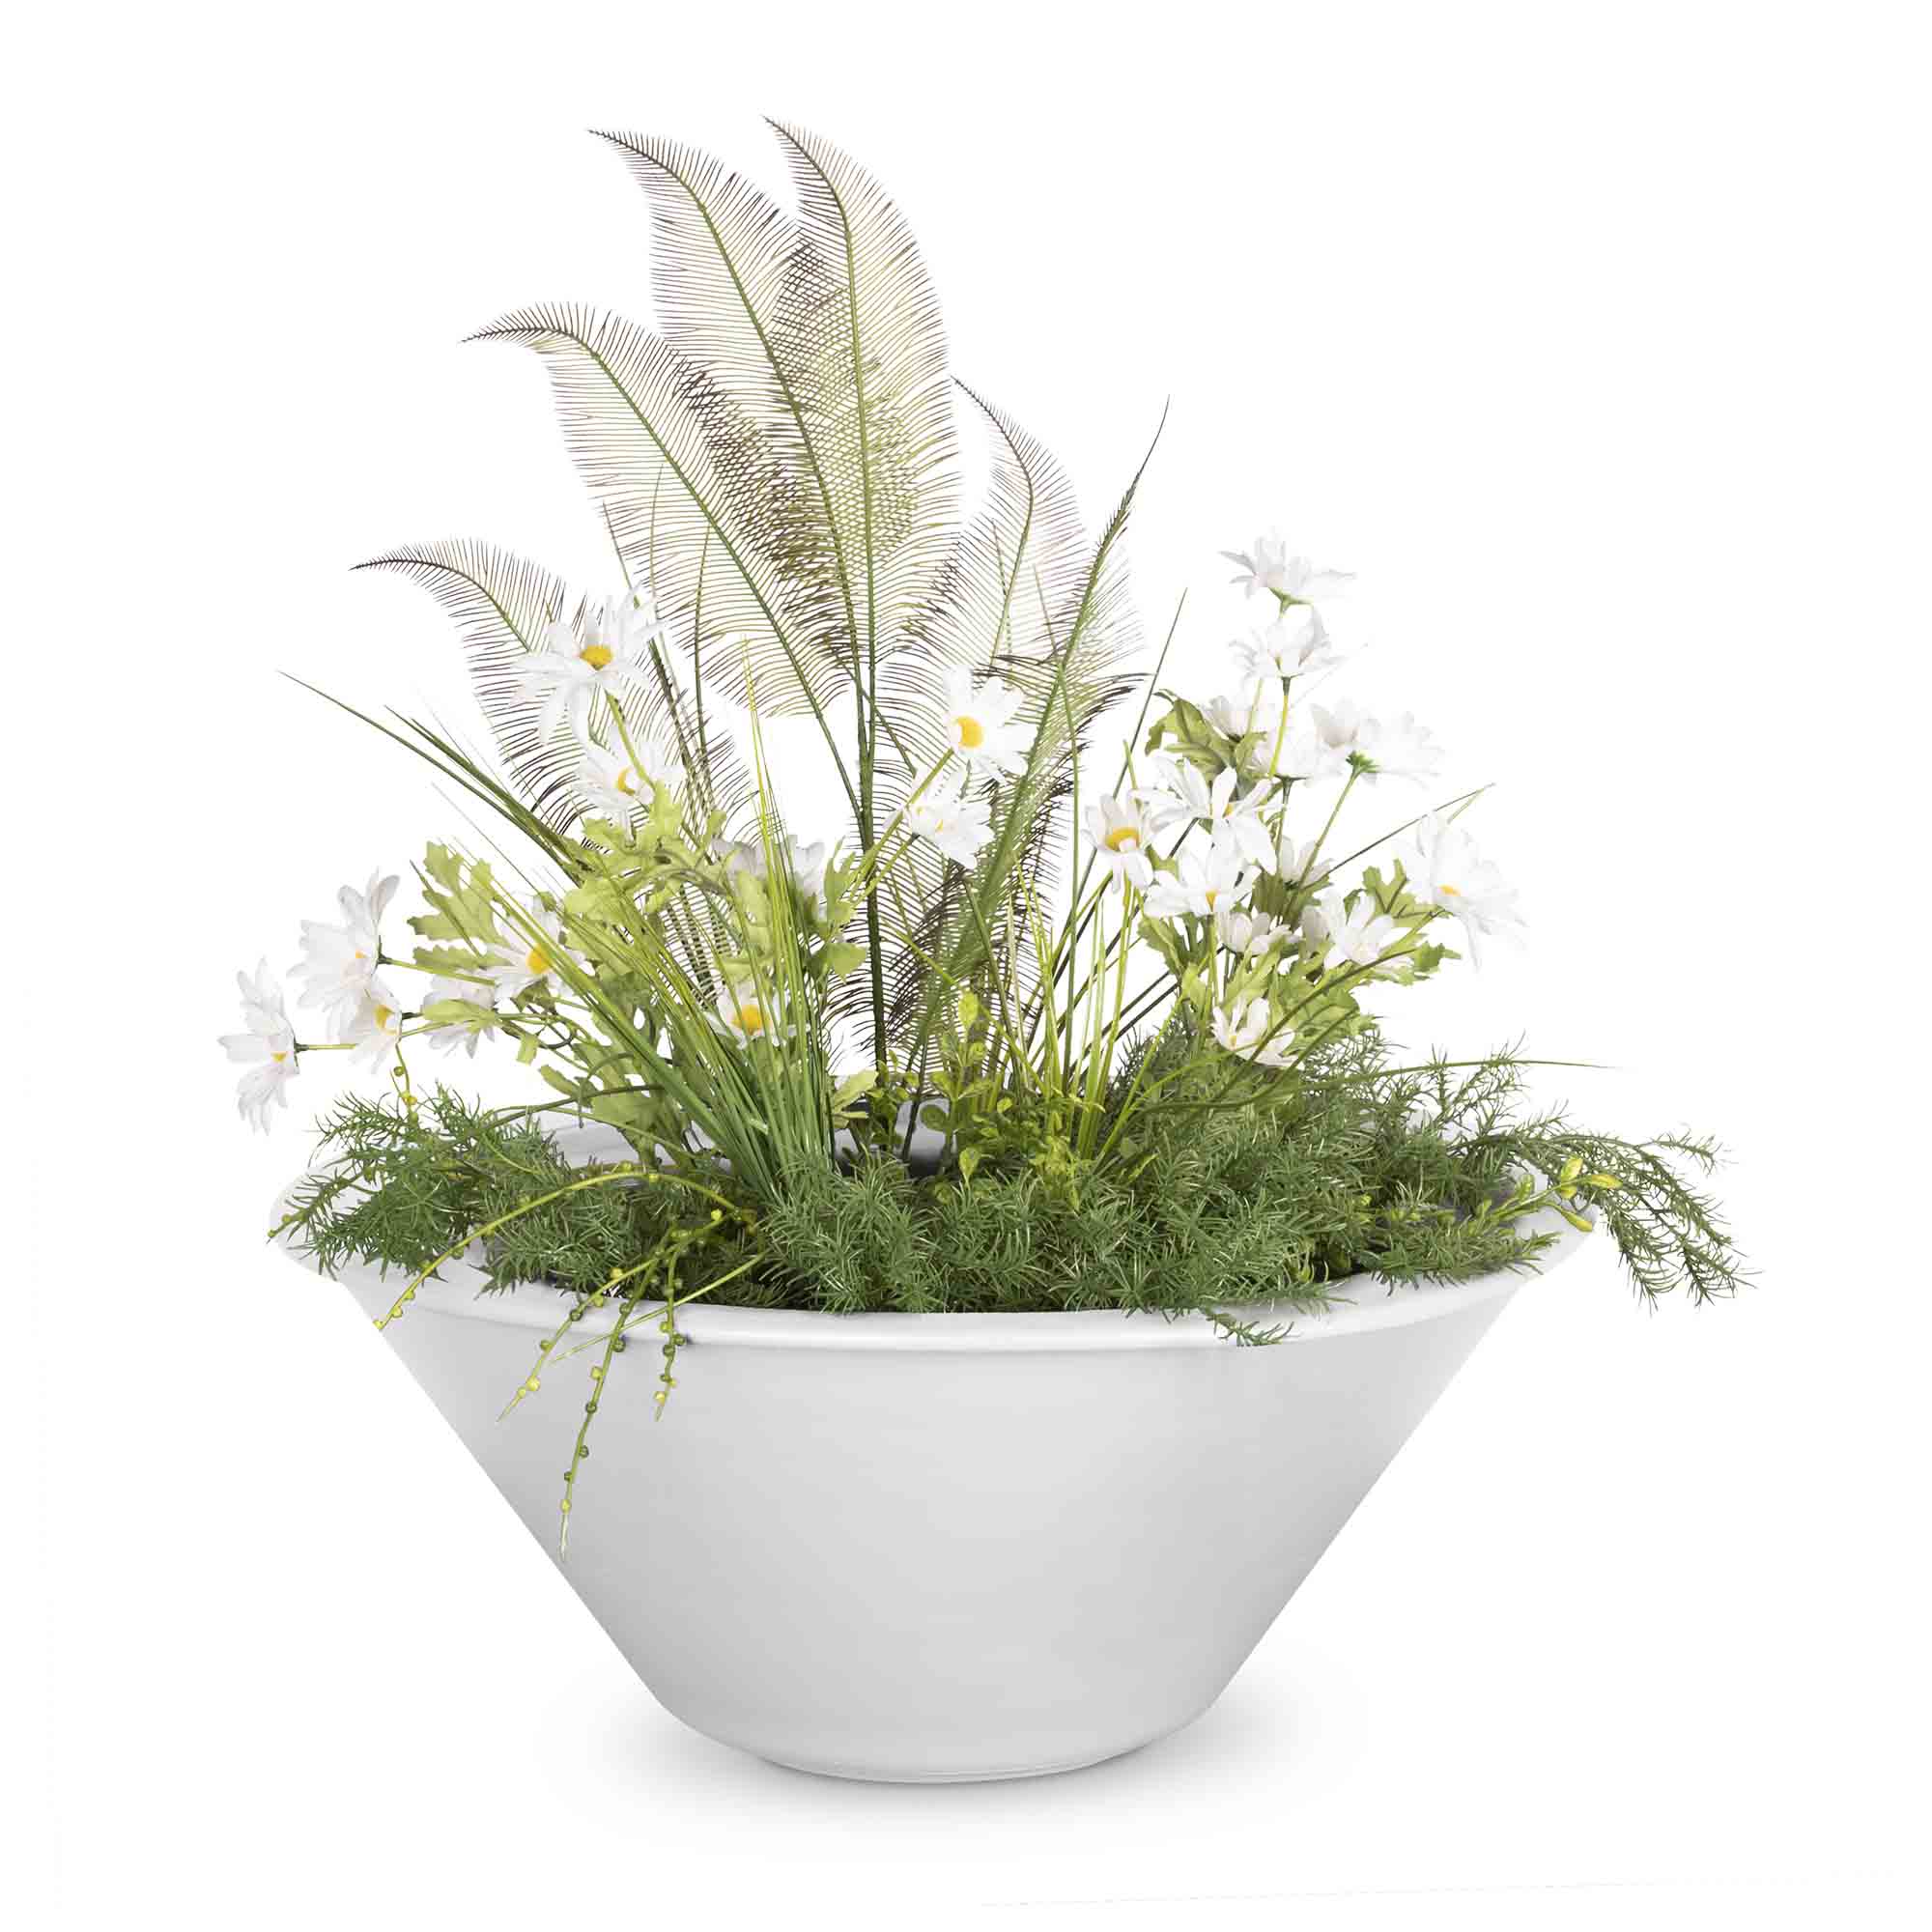 The Outdoor Plus Cazo Planter Bowl Powder Coated Metal OPT-RXXPCPO - Serenity Provision